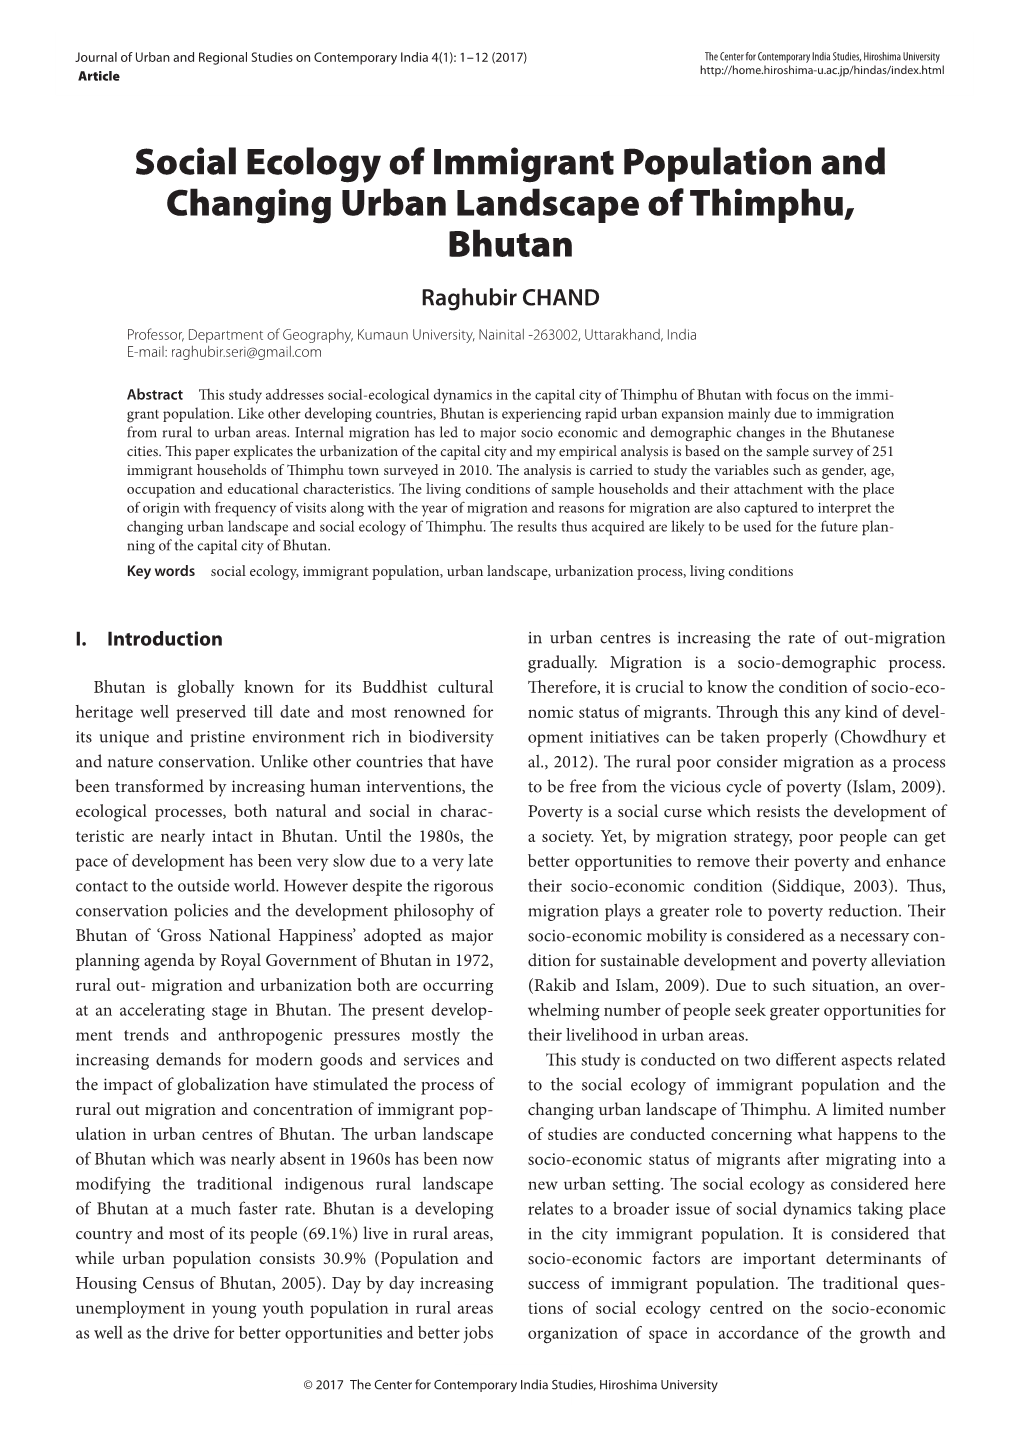 Social Ecology of Immigrant Population and Changing Urban Landscape of Thimphu, Bhutan Raghubir CHAND